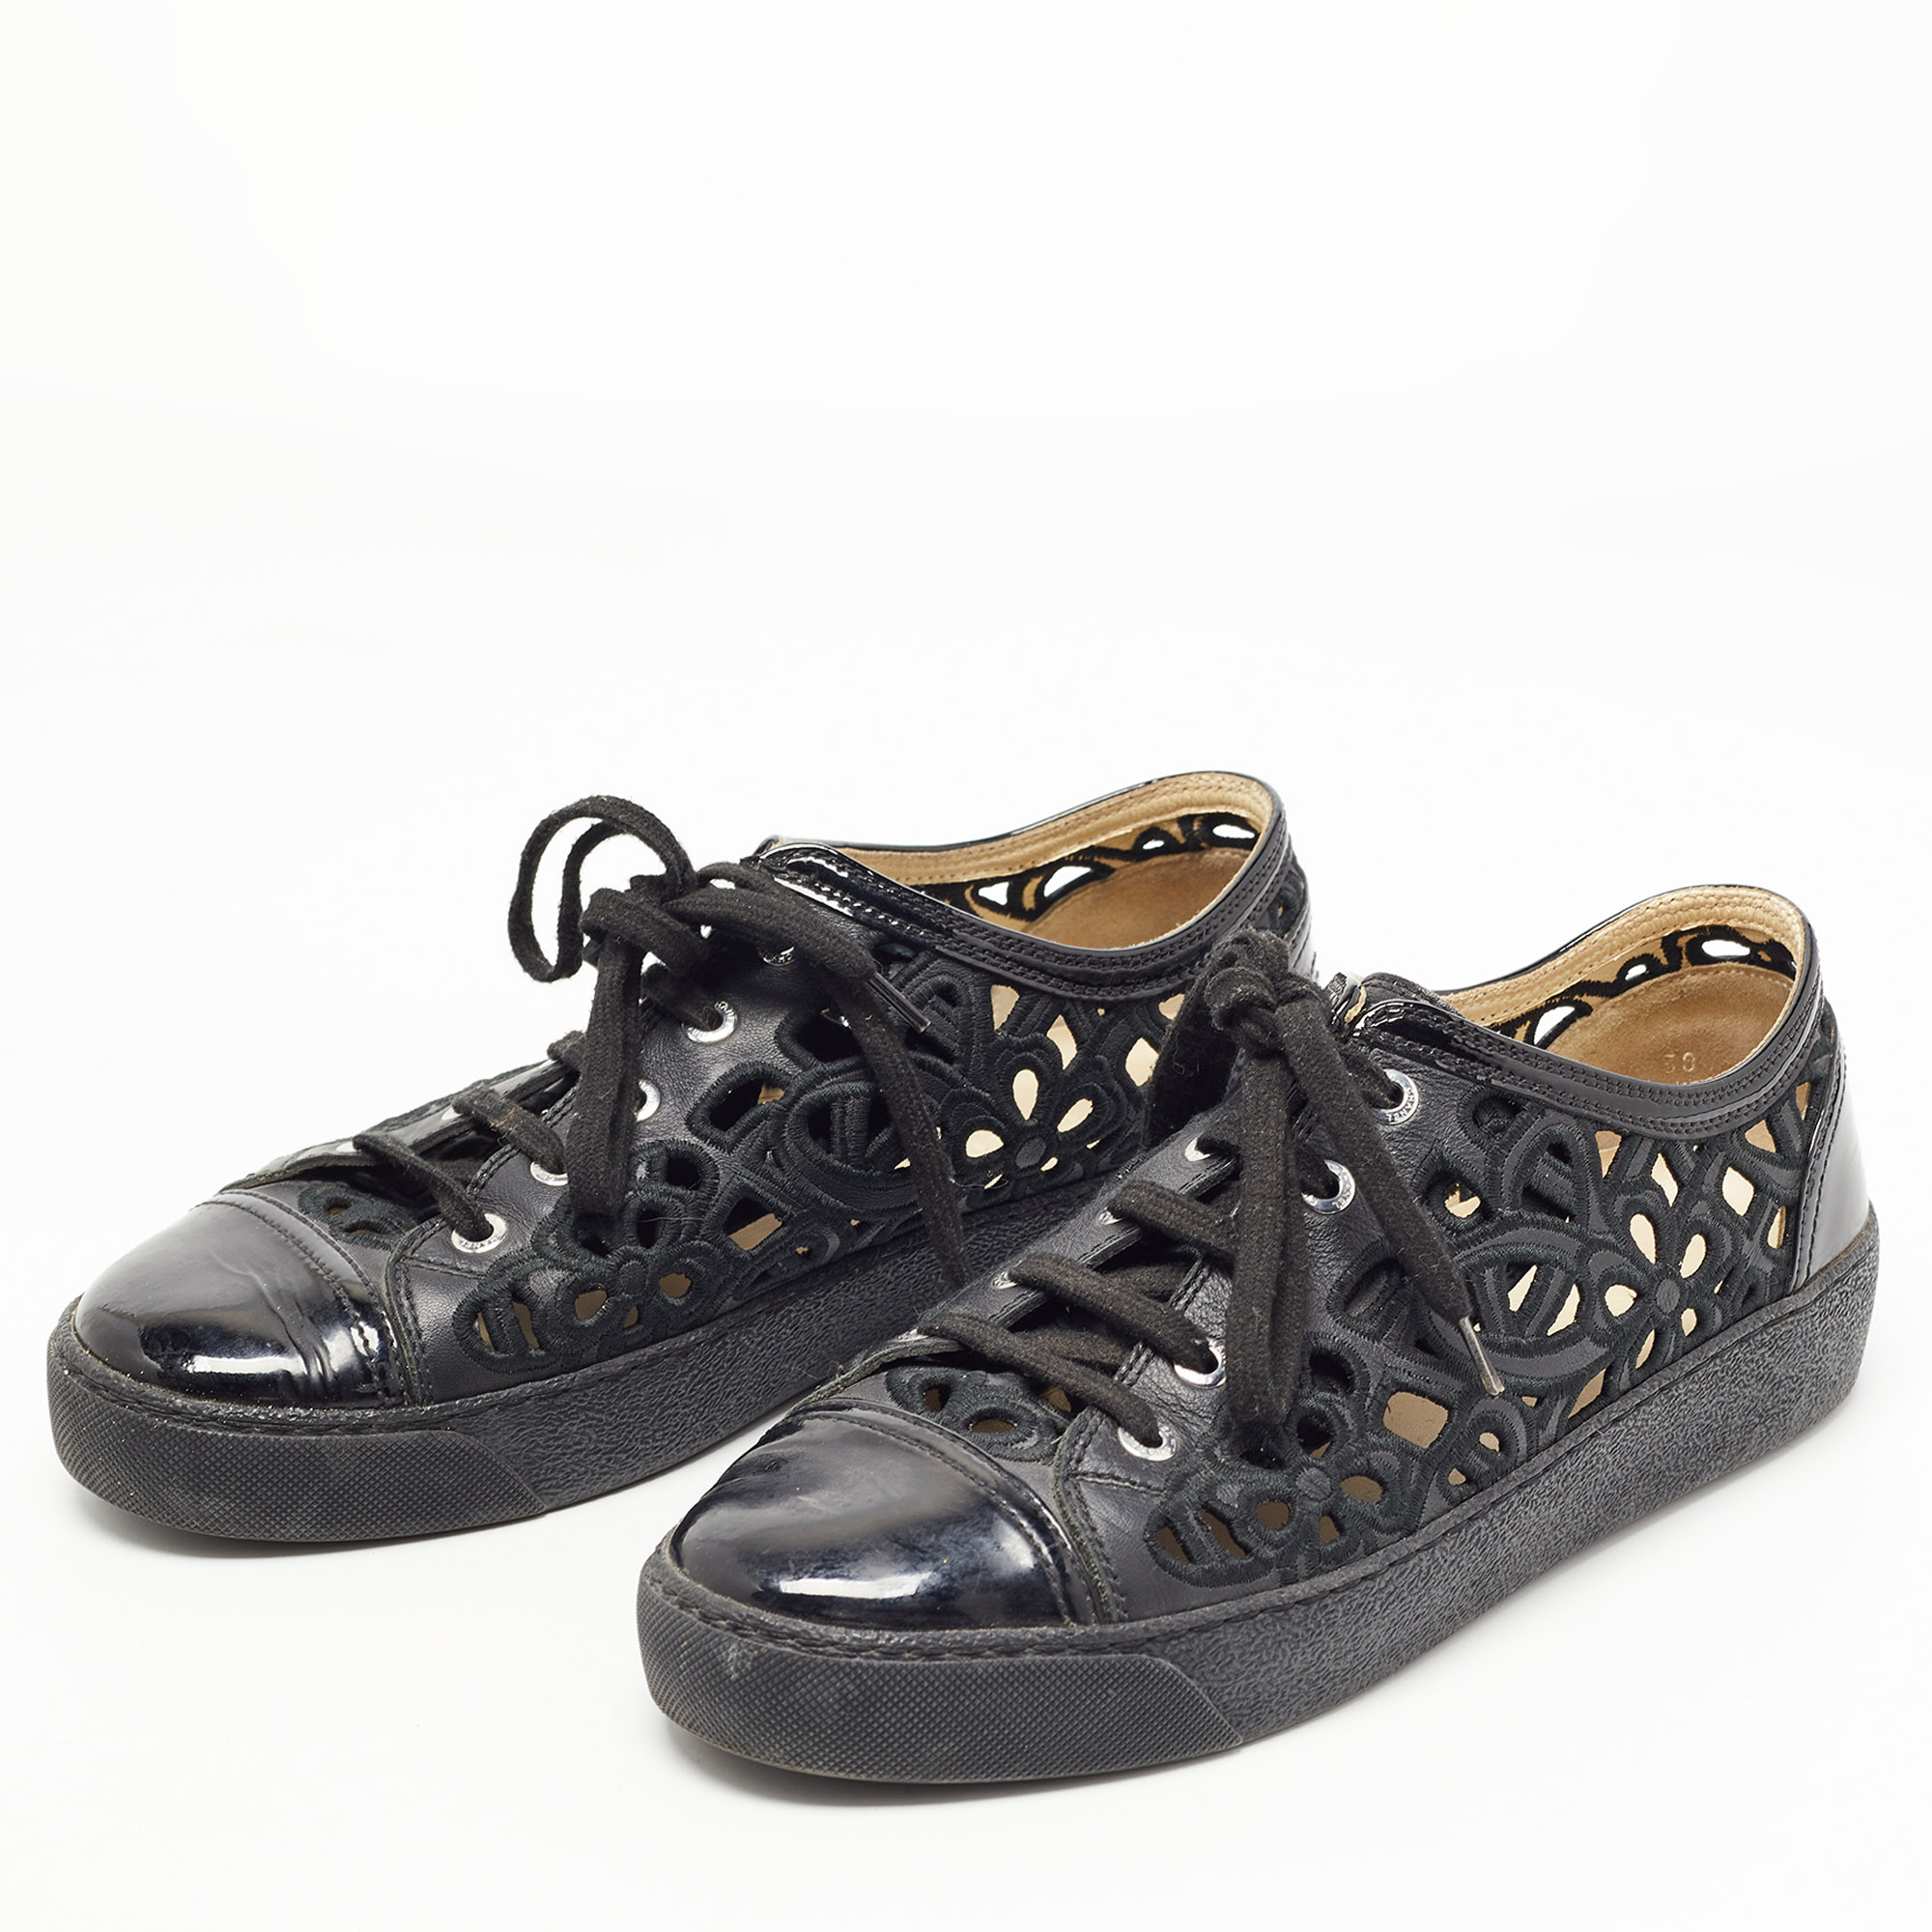 

Chanel Black Patent and Leather Floral Cutout CC Low Top Sneakers Size